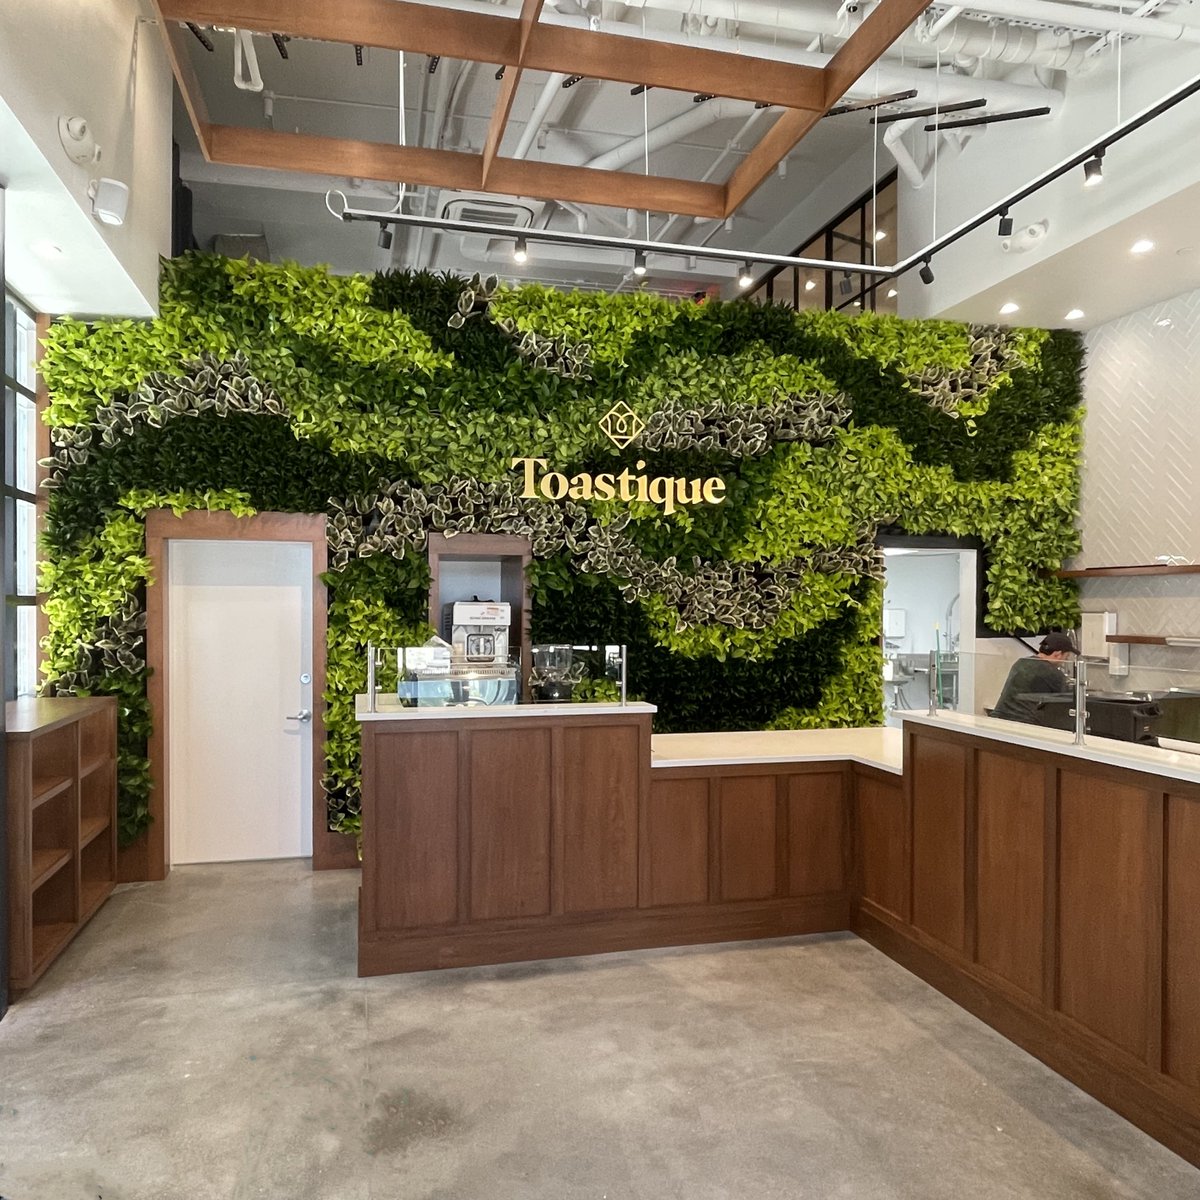 🌱Toastique boutique gourmet bar has added a green wall to its store. This is their second location with a GSky wall.  🌱 The wall is designed to bring more light and nature into the store, creating an immersive environment that makes customers feel healthy and relaxed.